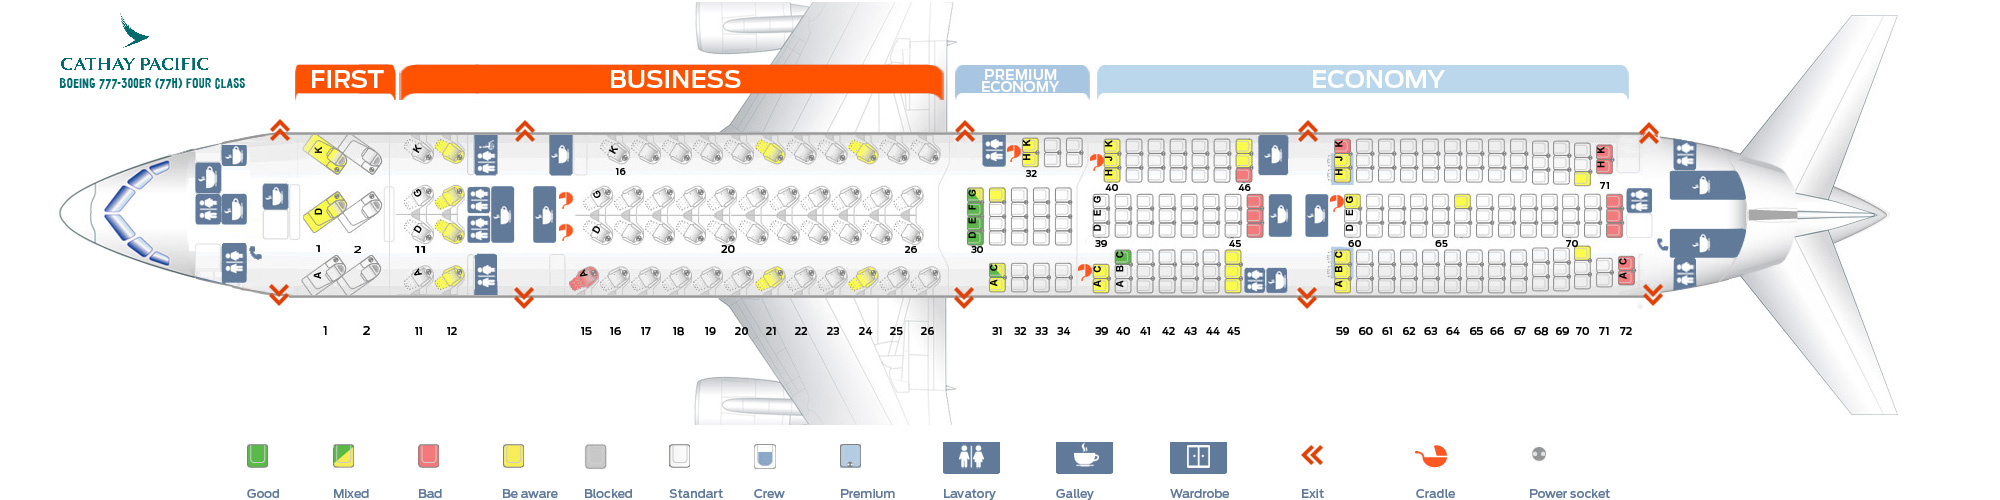 Seat Map Boeing 777-300ER Four Class Cathay Pacific